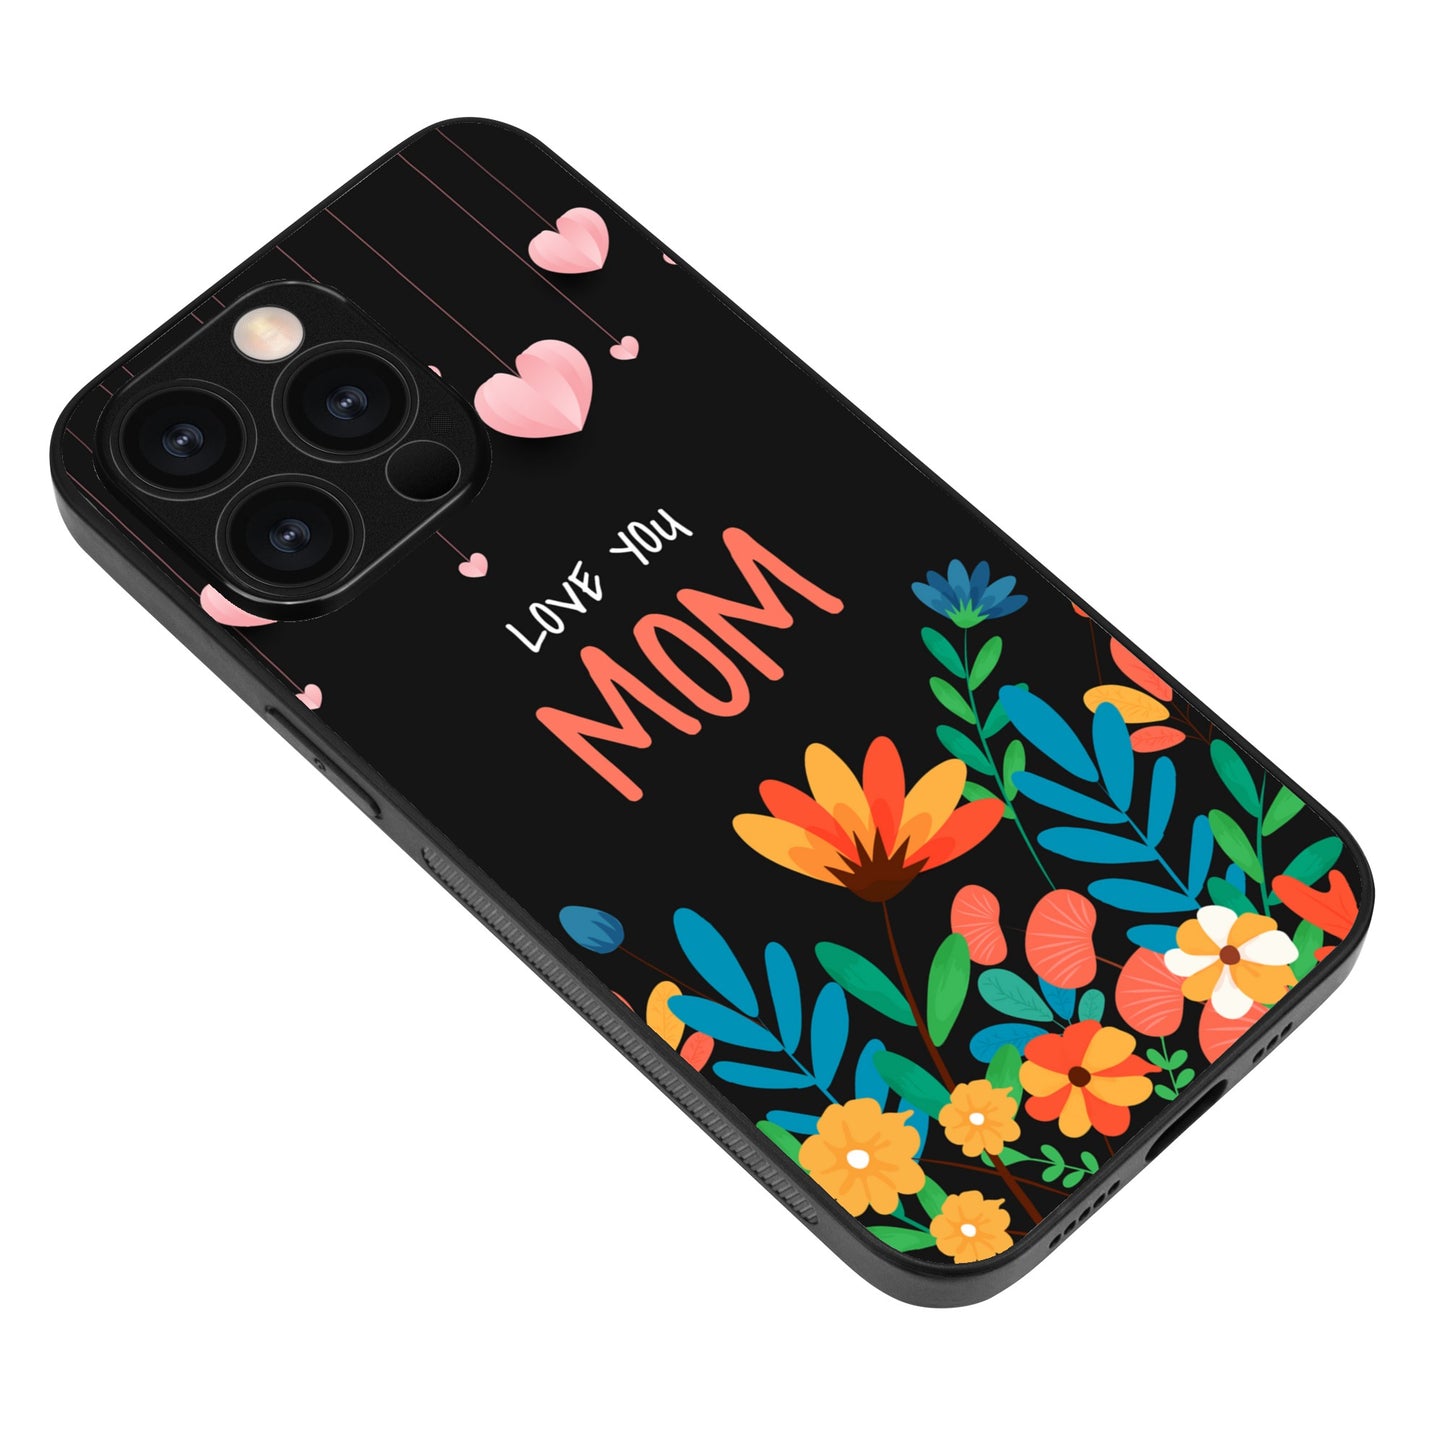 I Love You Mom iPhone13 Series Phone Cases Great for Mothers Day